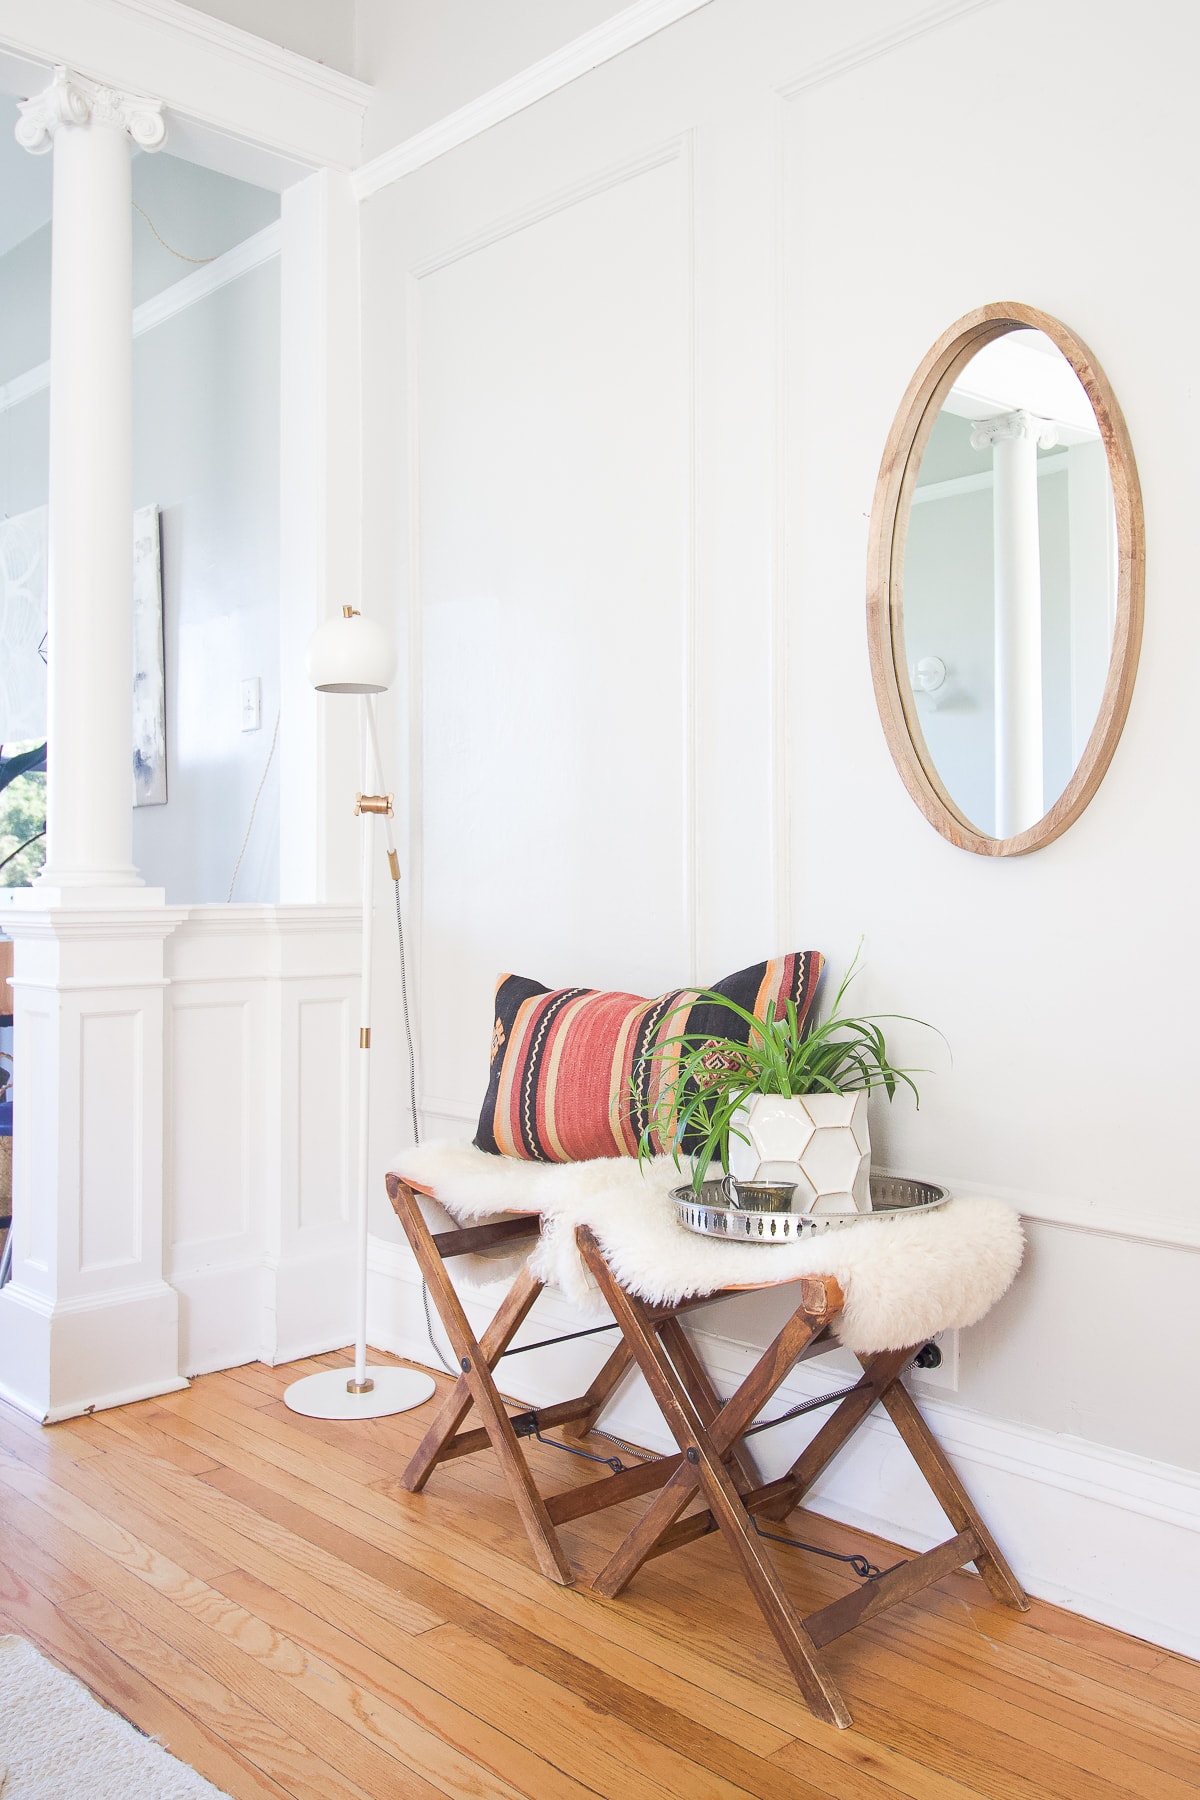 How to create an small entryway in a rental